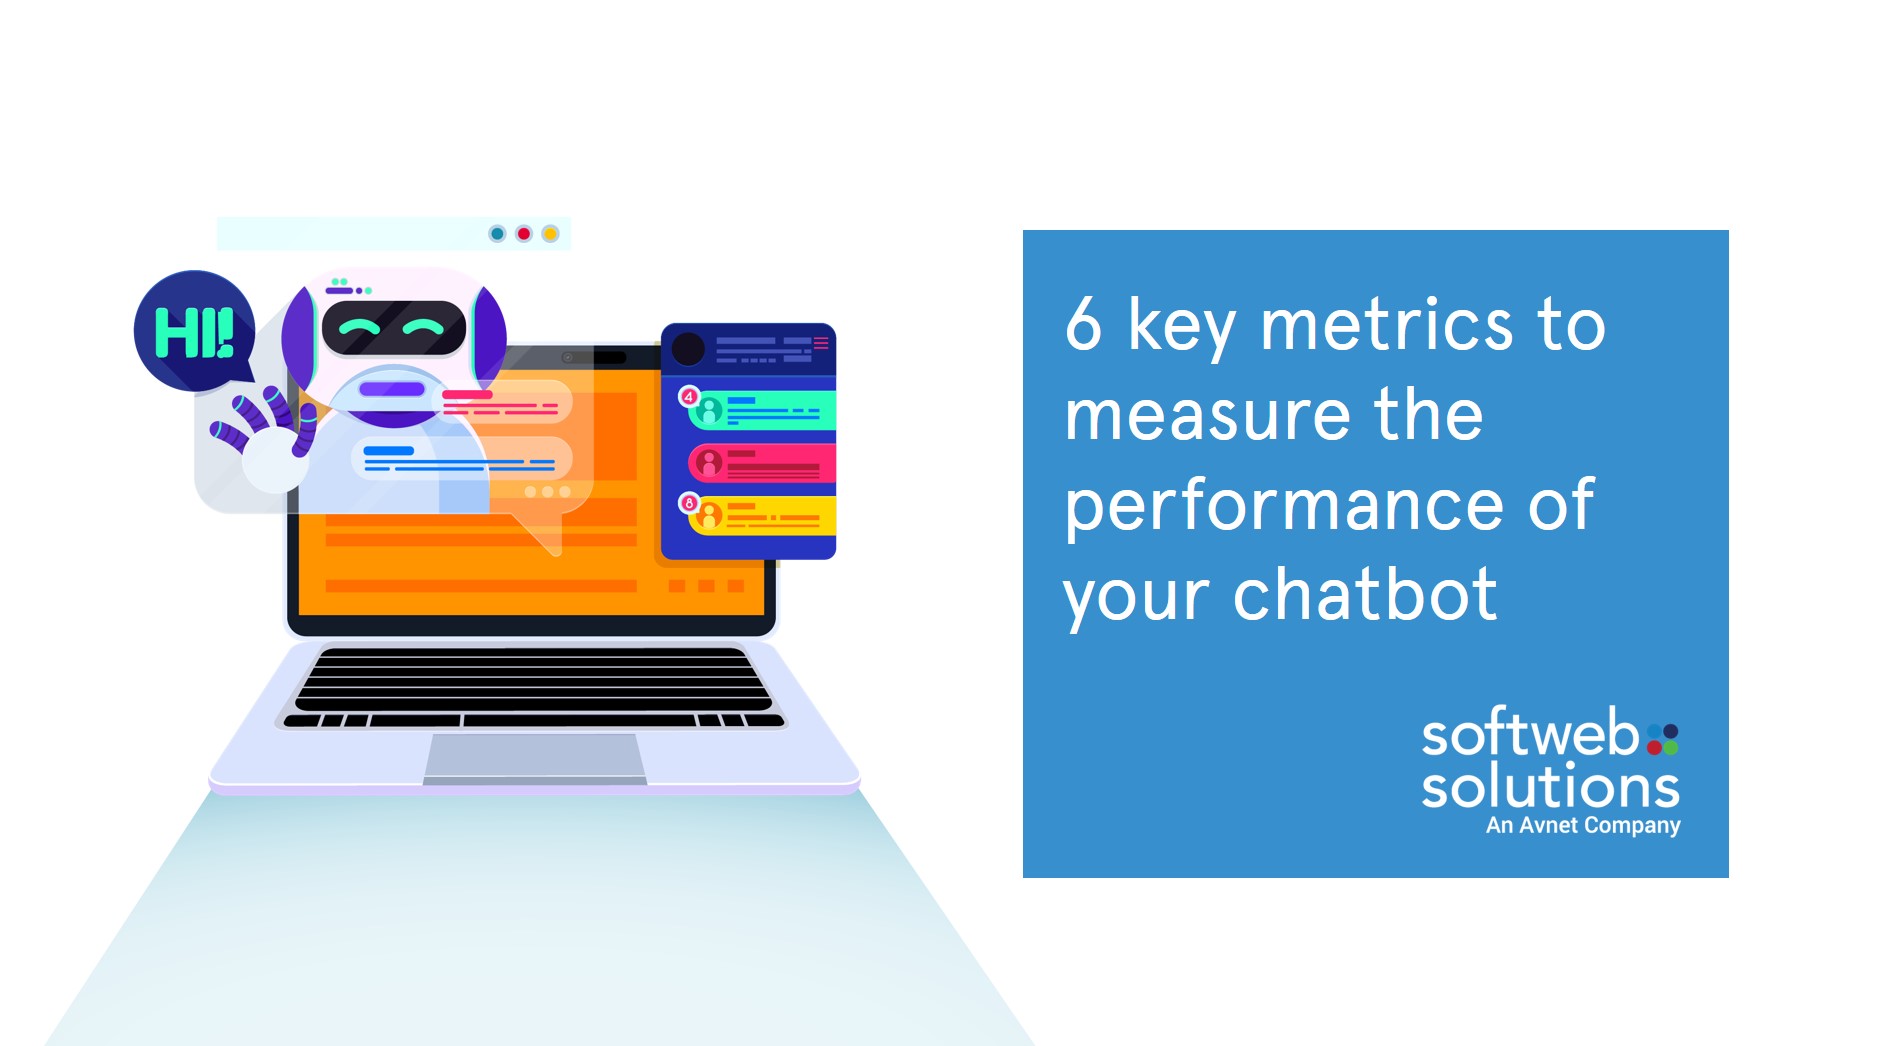 Key metrics to measure the performance of your chatbot